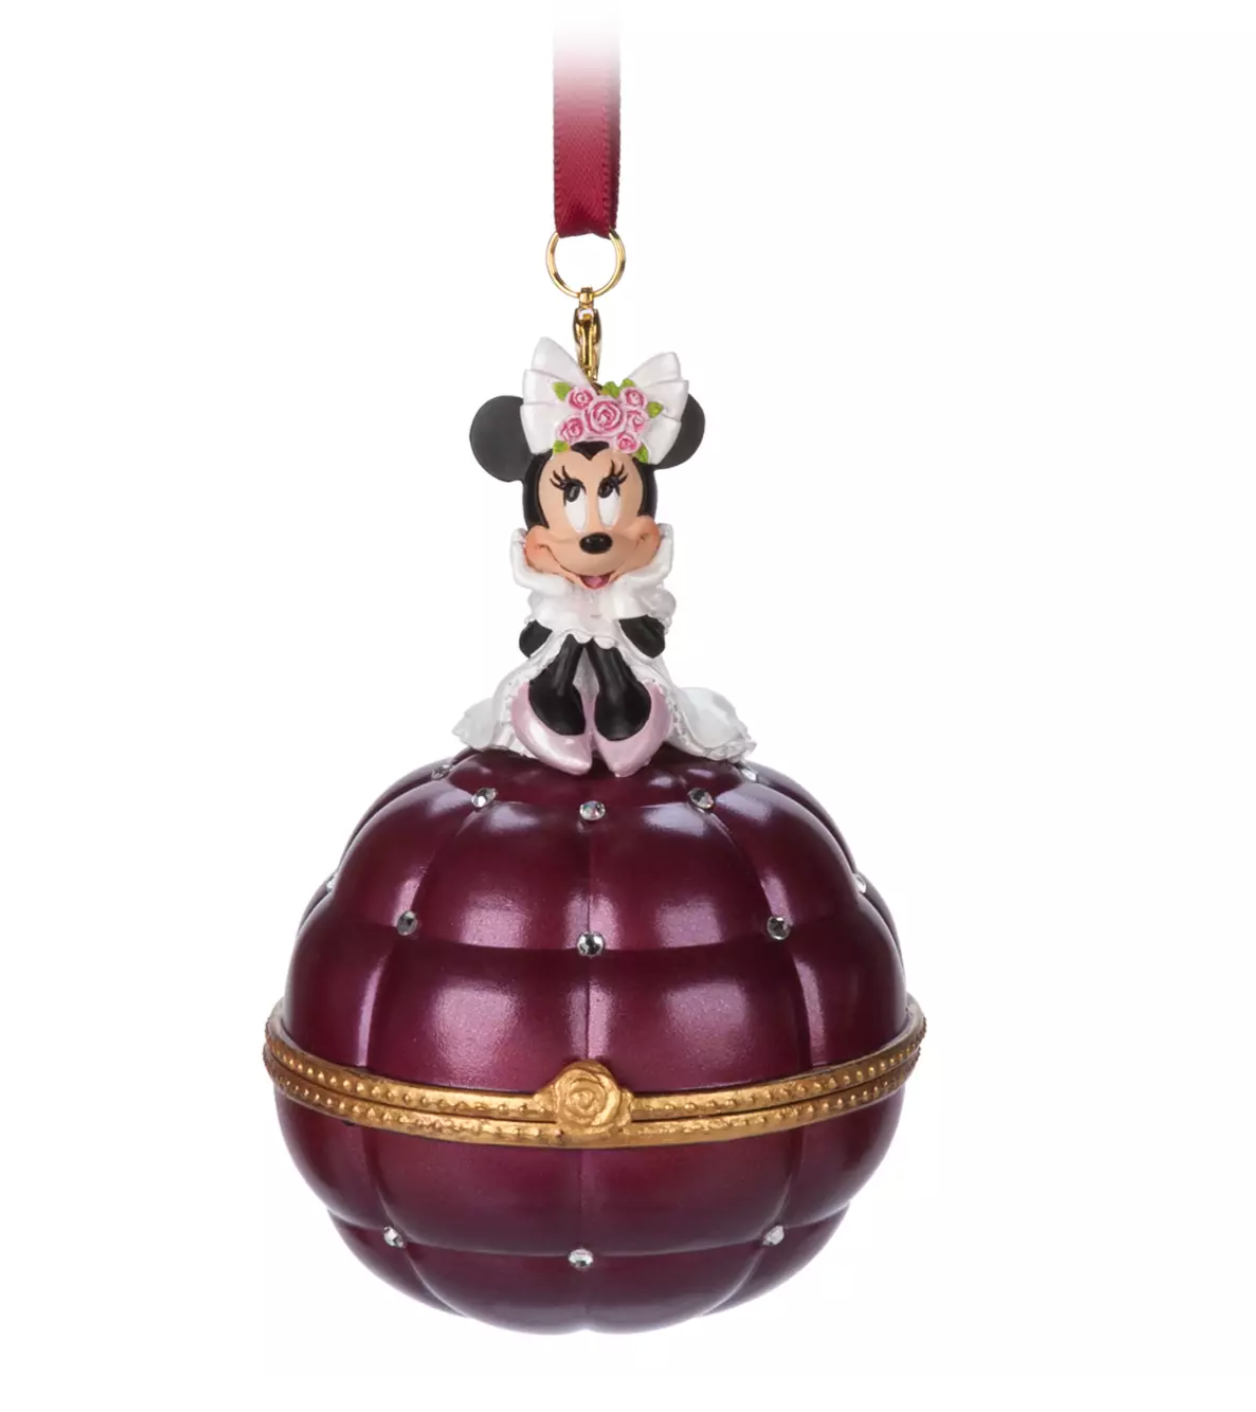 Disney Sketchbook Minnie Engagement Ring Box Christmas Ornament New with Box